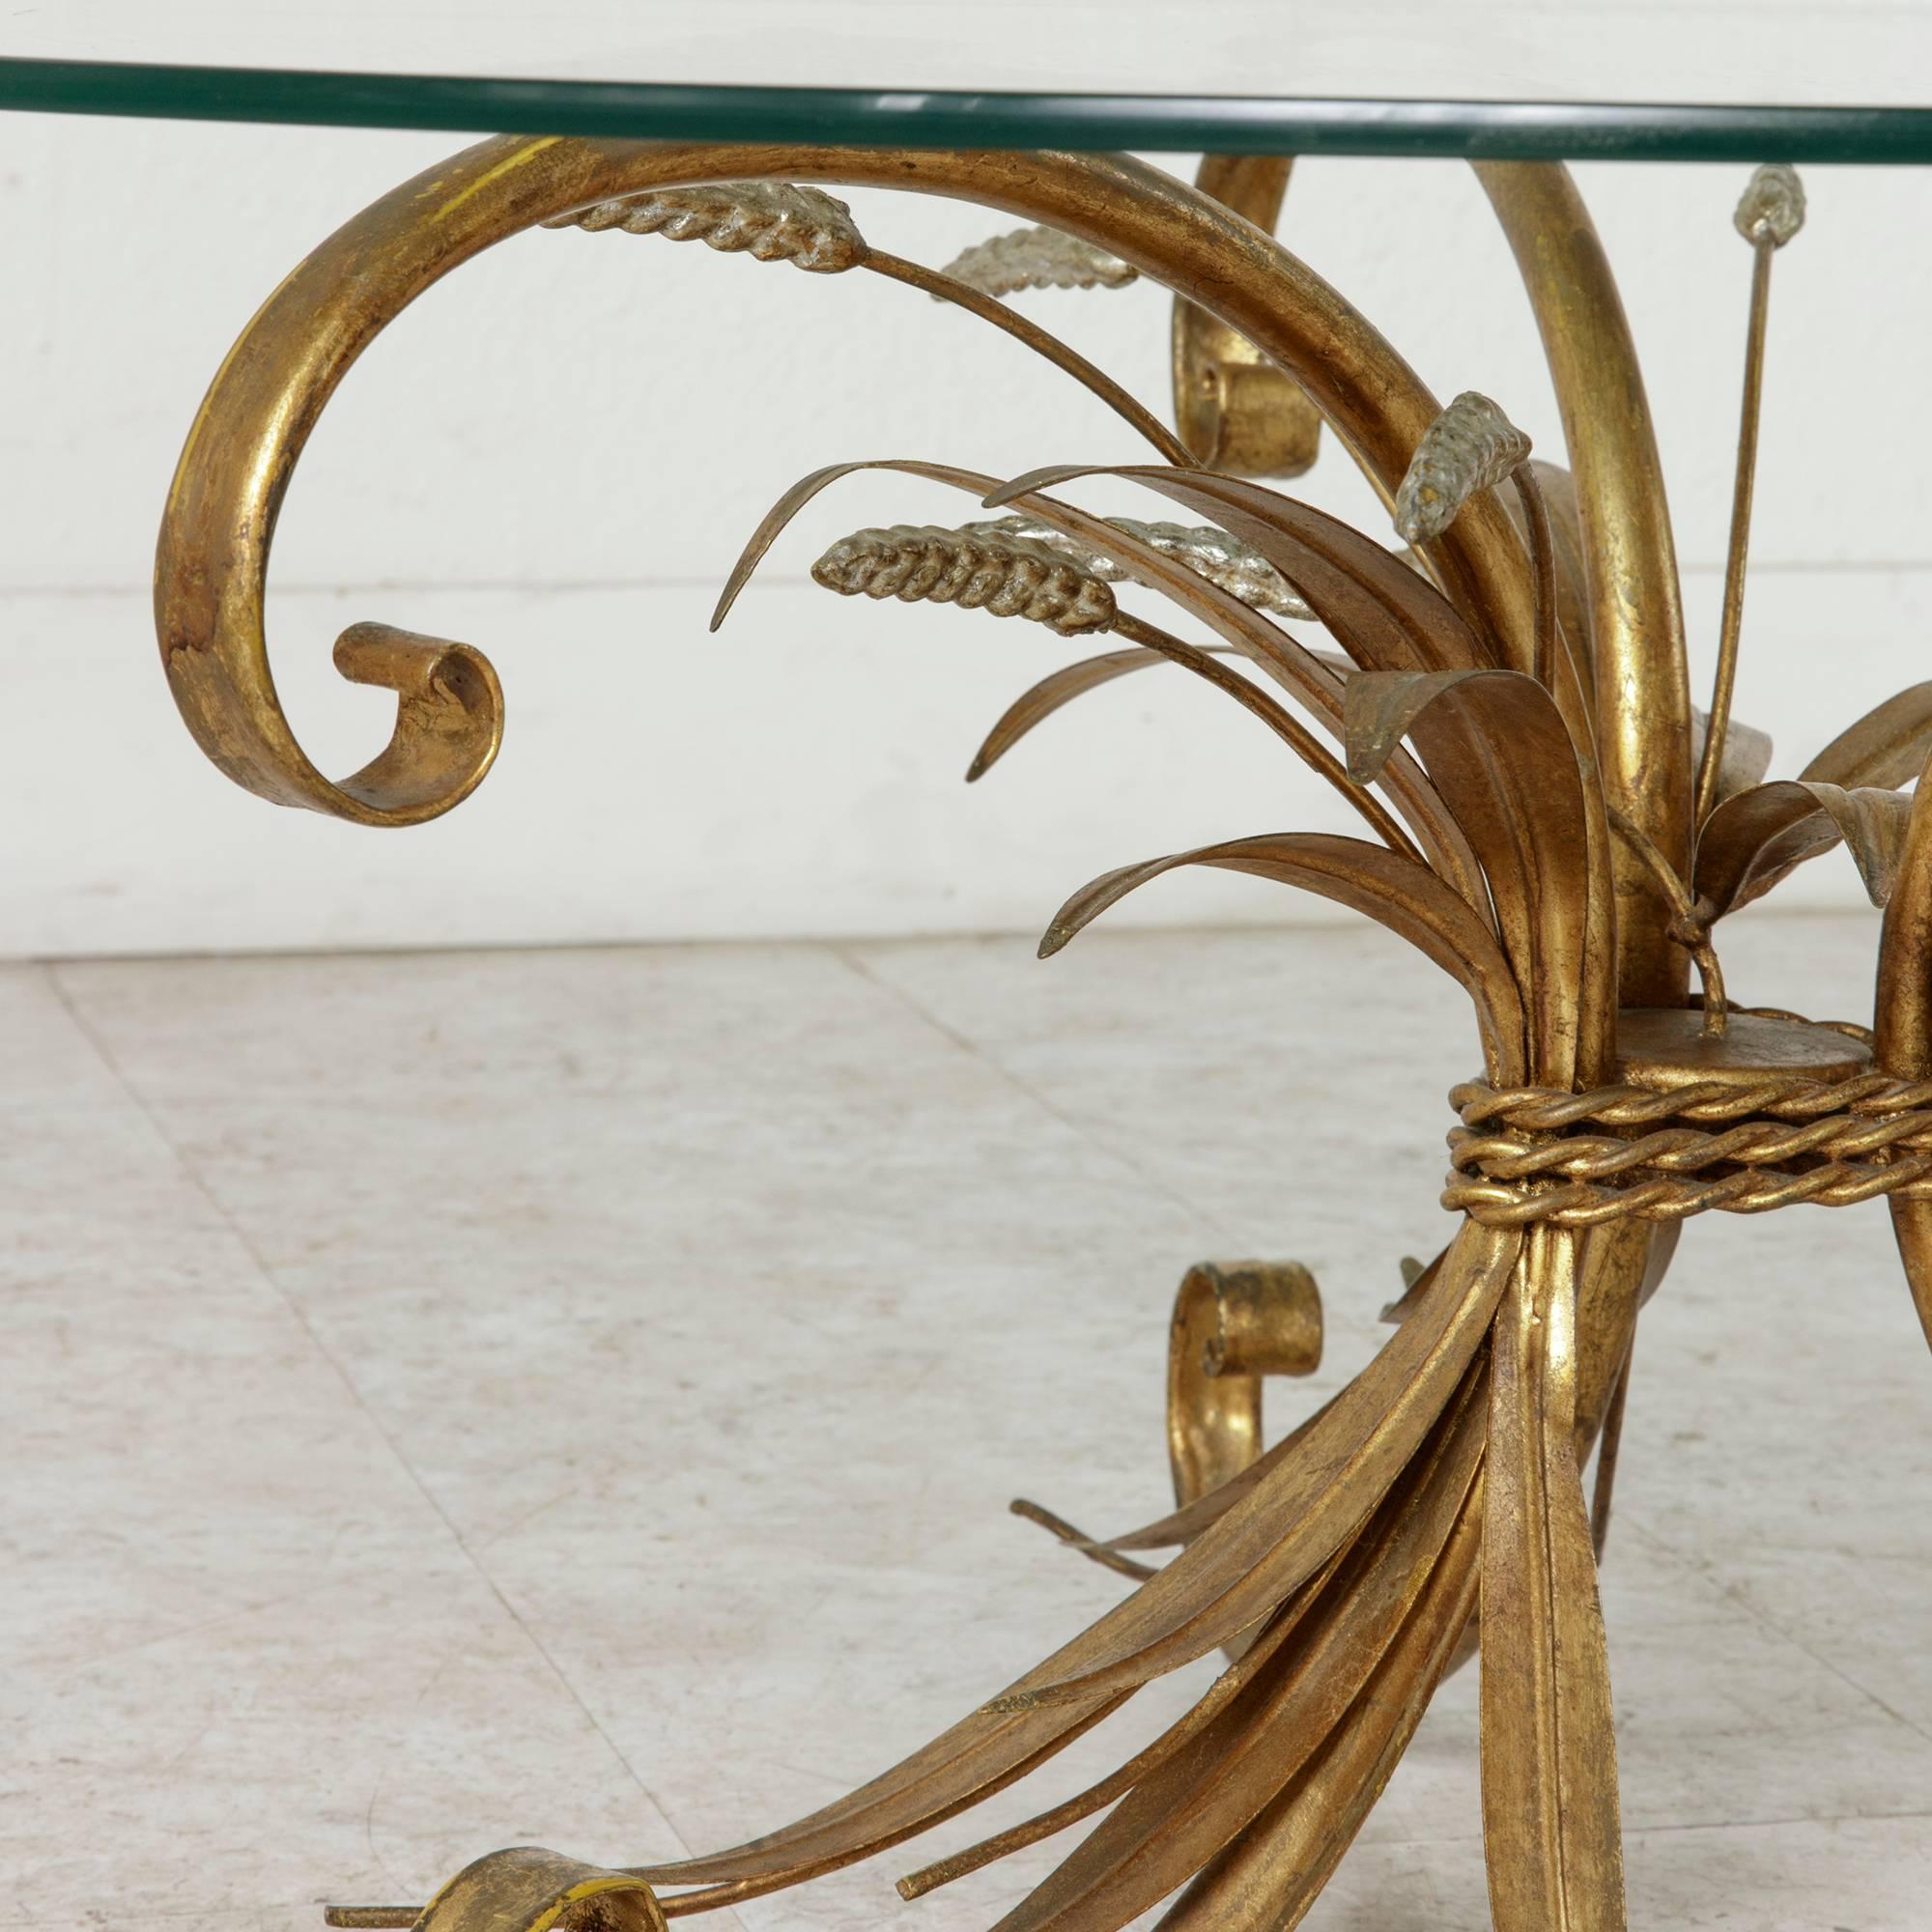 Attributed to Maison Baguès, this classic mid-century piece has become the iconic Coco Chanel coffee table. Gilded sheaves of wheat bound together by twisted cord of gilt metal and accented with silver detailing support its original glass top. This